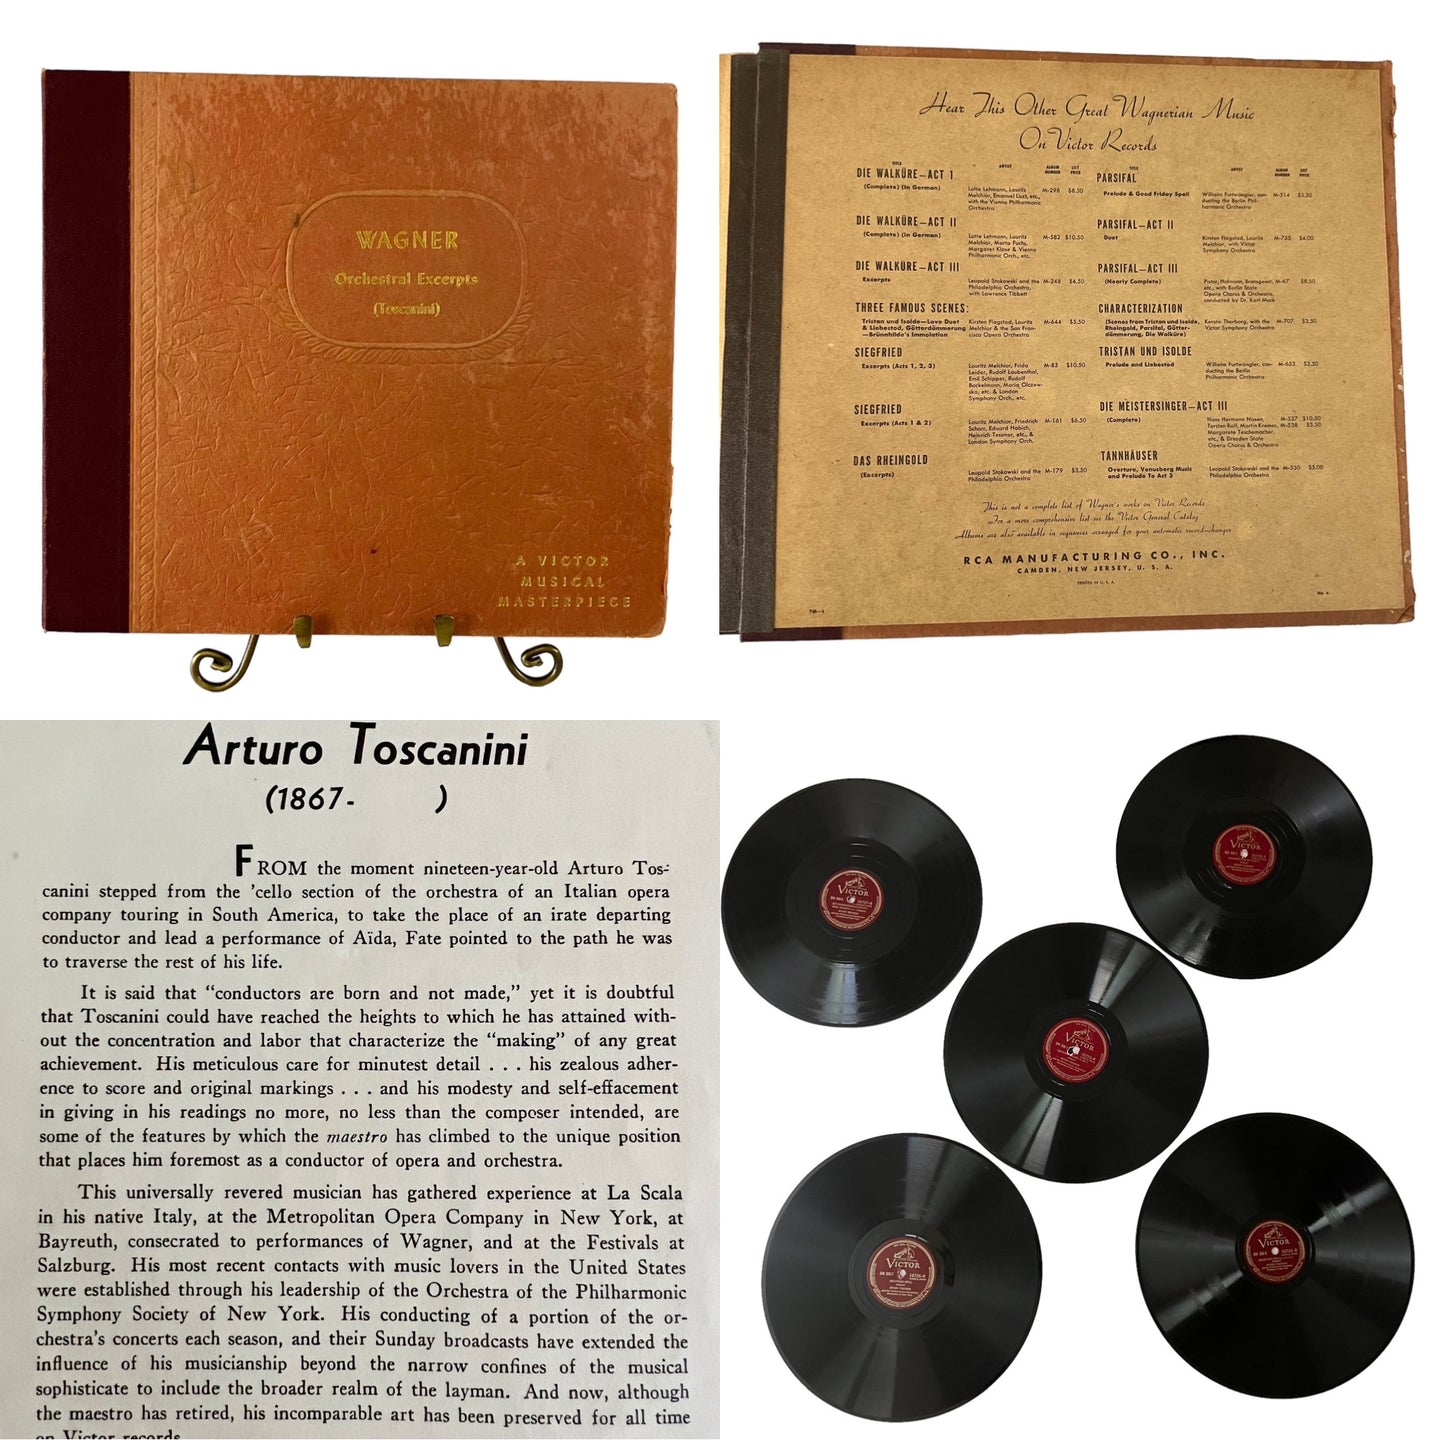 RCA Victor Red Seal/Red Label Records - Wagner  Orchestral Excerpts (Toscanini)  Arturo Toscanini And The Philharmonic Symphony Orchestra of New York.